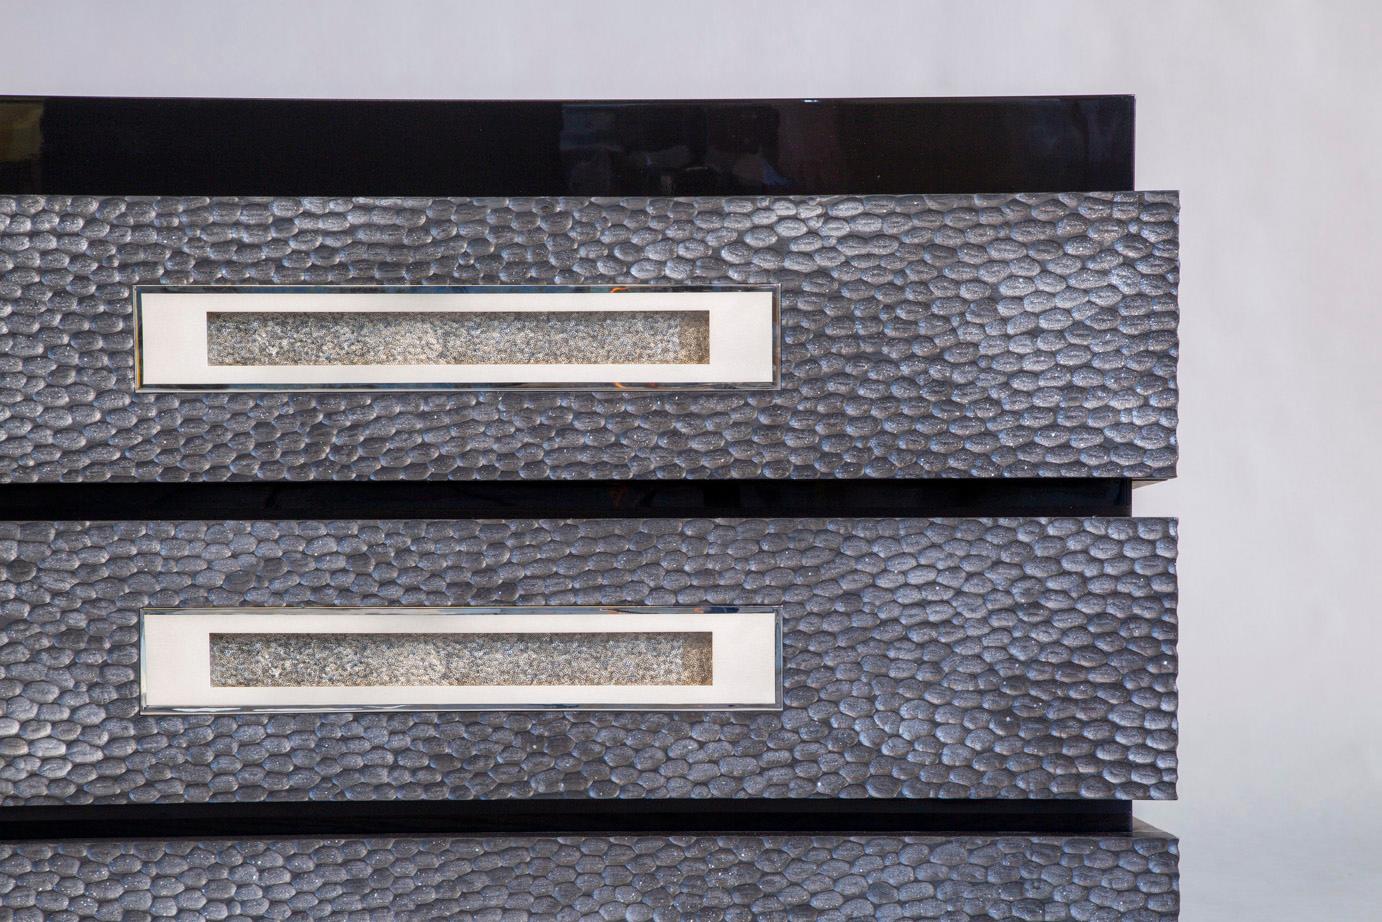 Black piano lacquered main body, with three “bands” of carved silver oak drawers featuring 
silvered bronze handles. The insides of the drawers are lined with felt. 
Custom sizes, finishes, materials available.